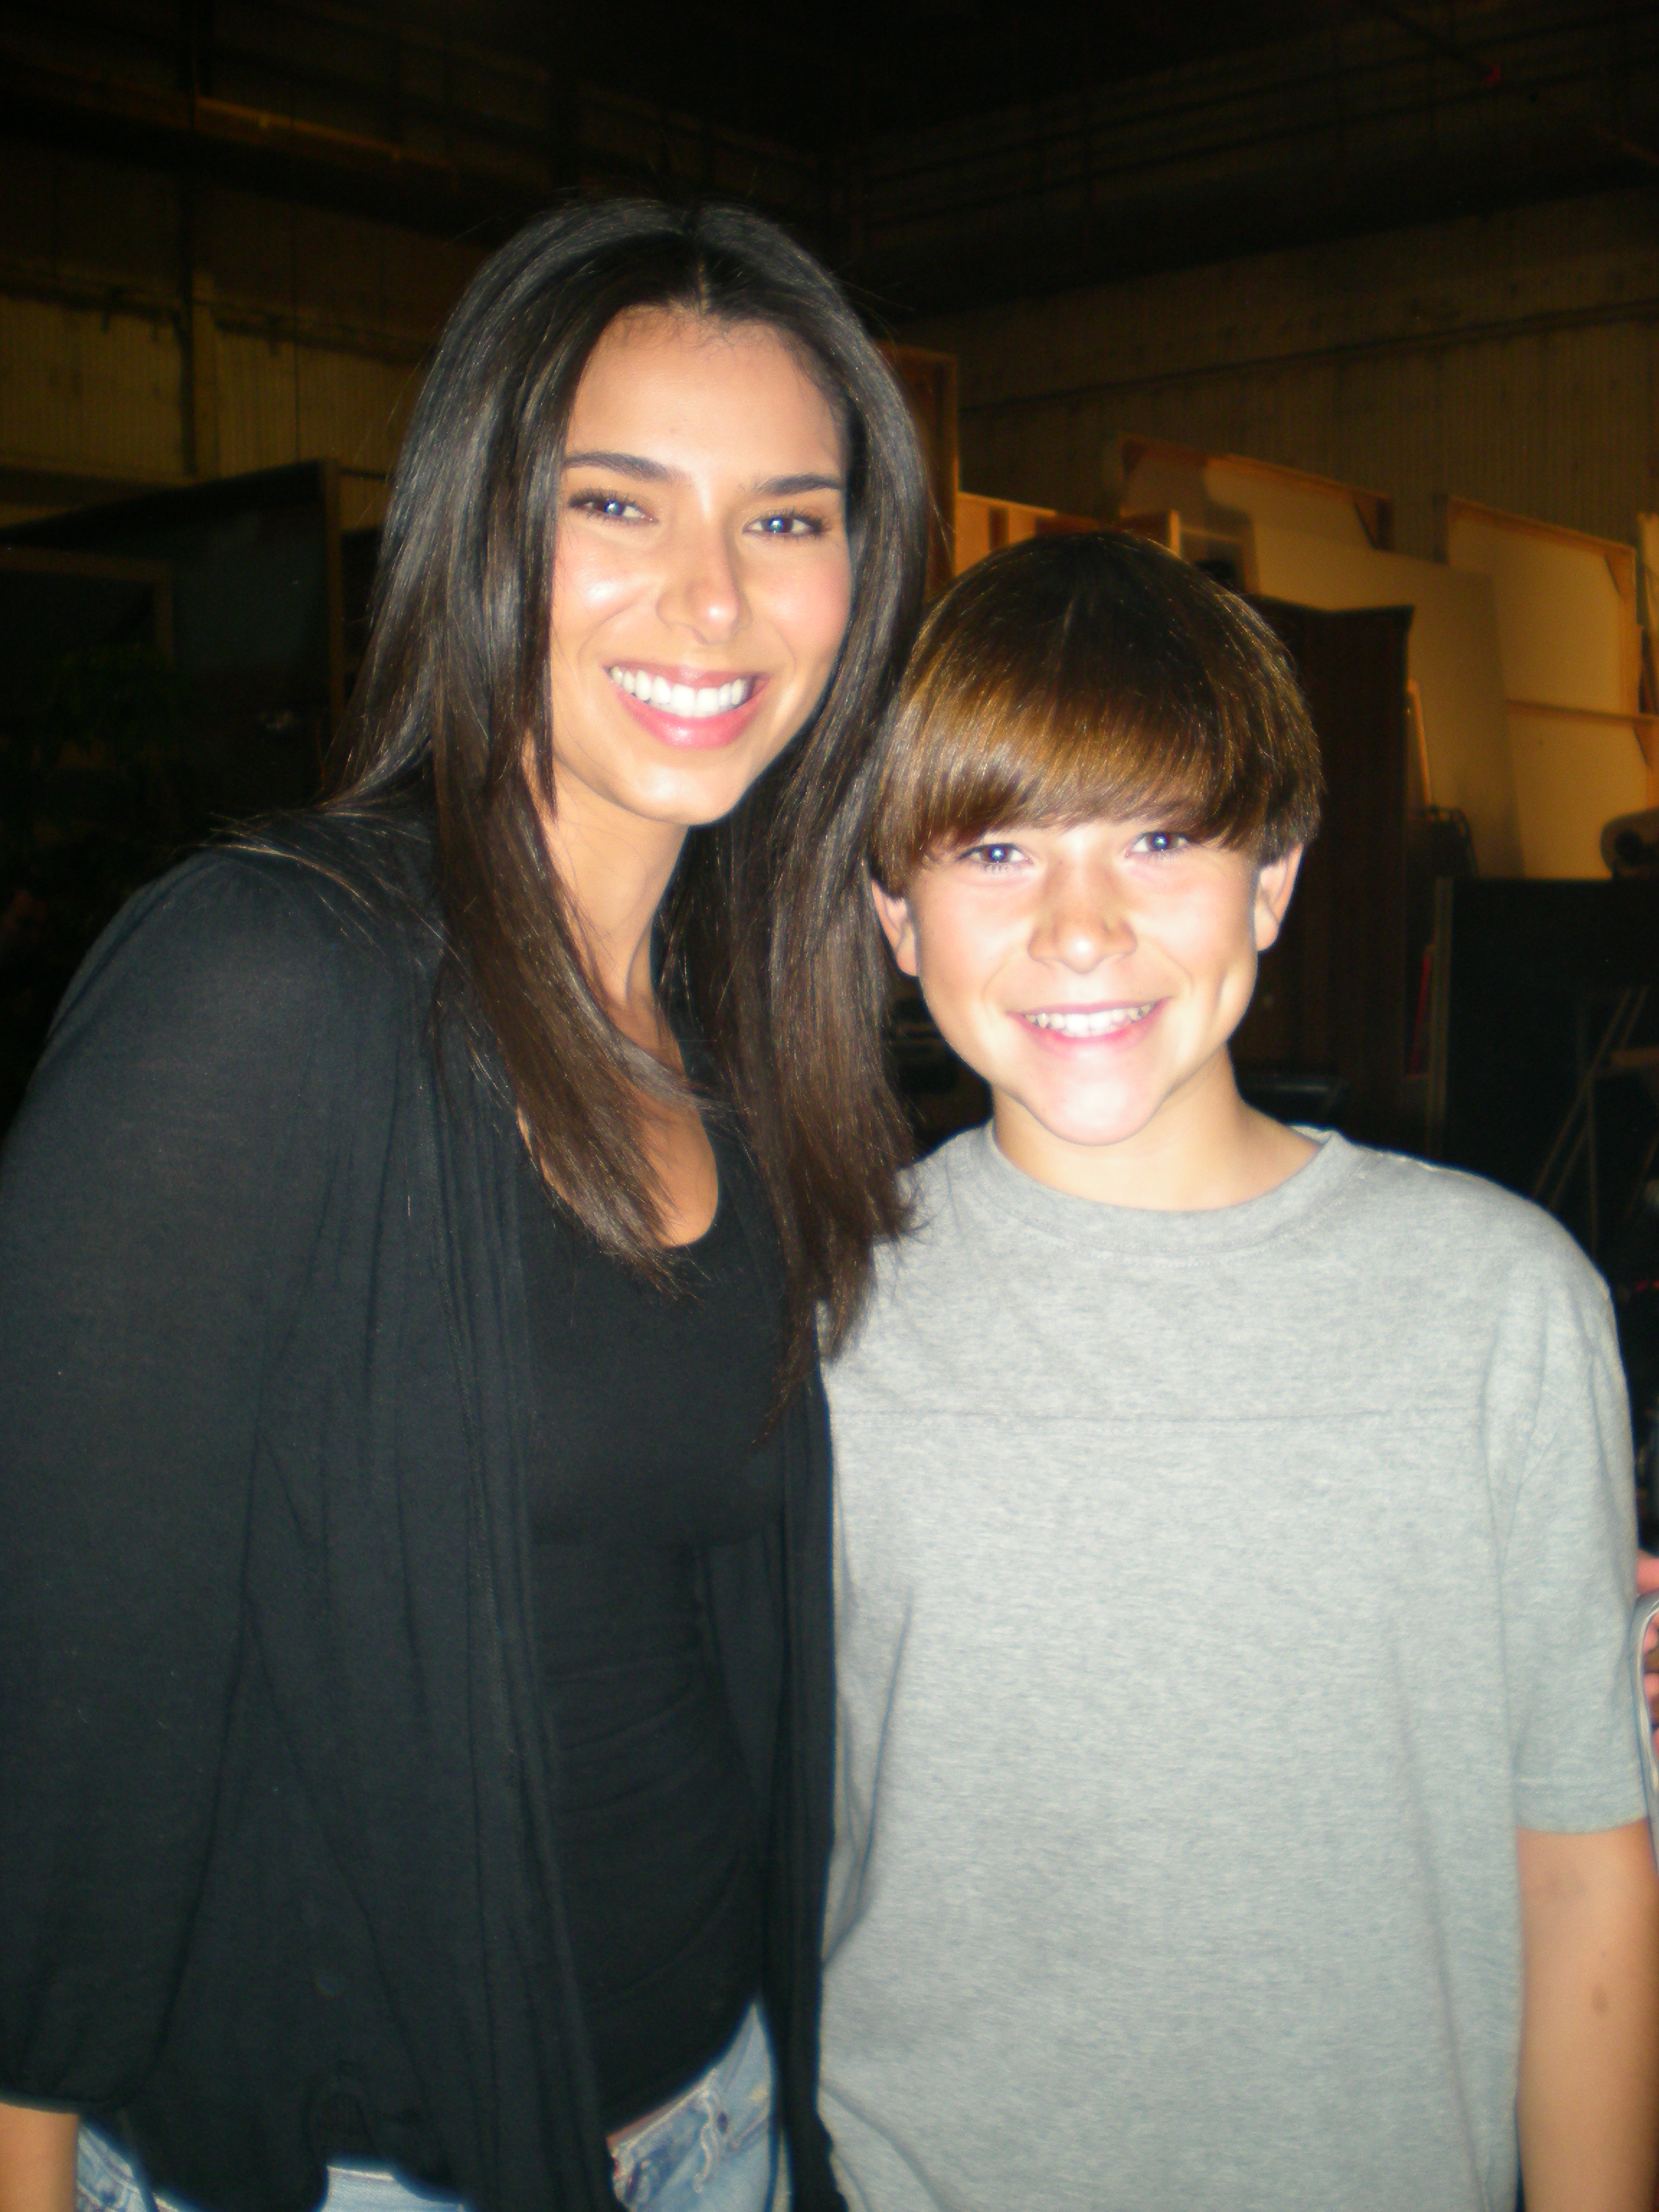 Wyatt Smith & Roselyn Sanchez, Without A Trace, 2007.